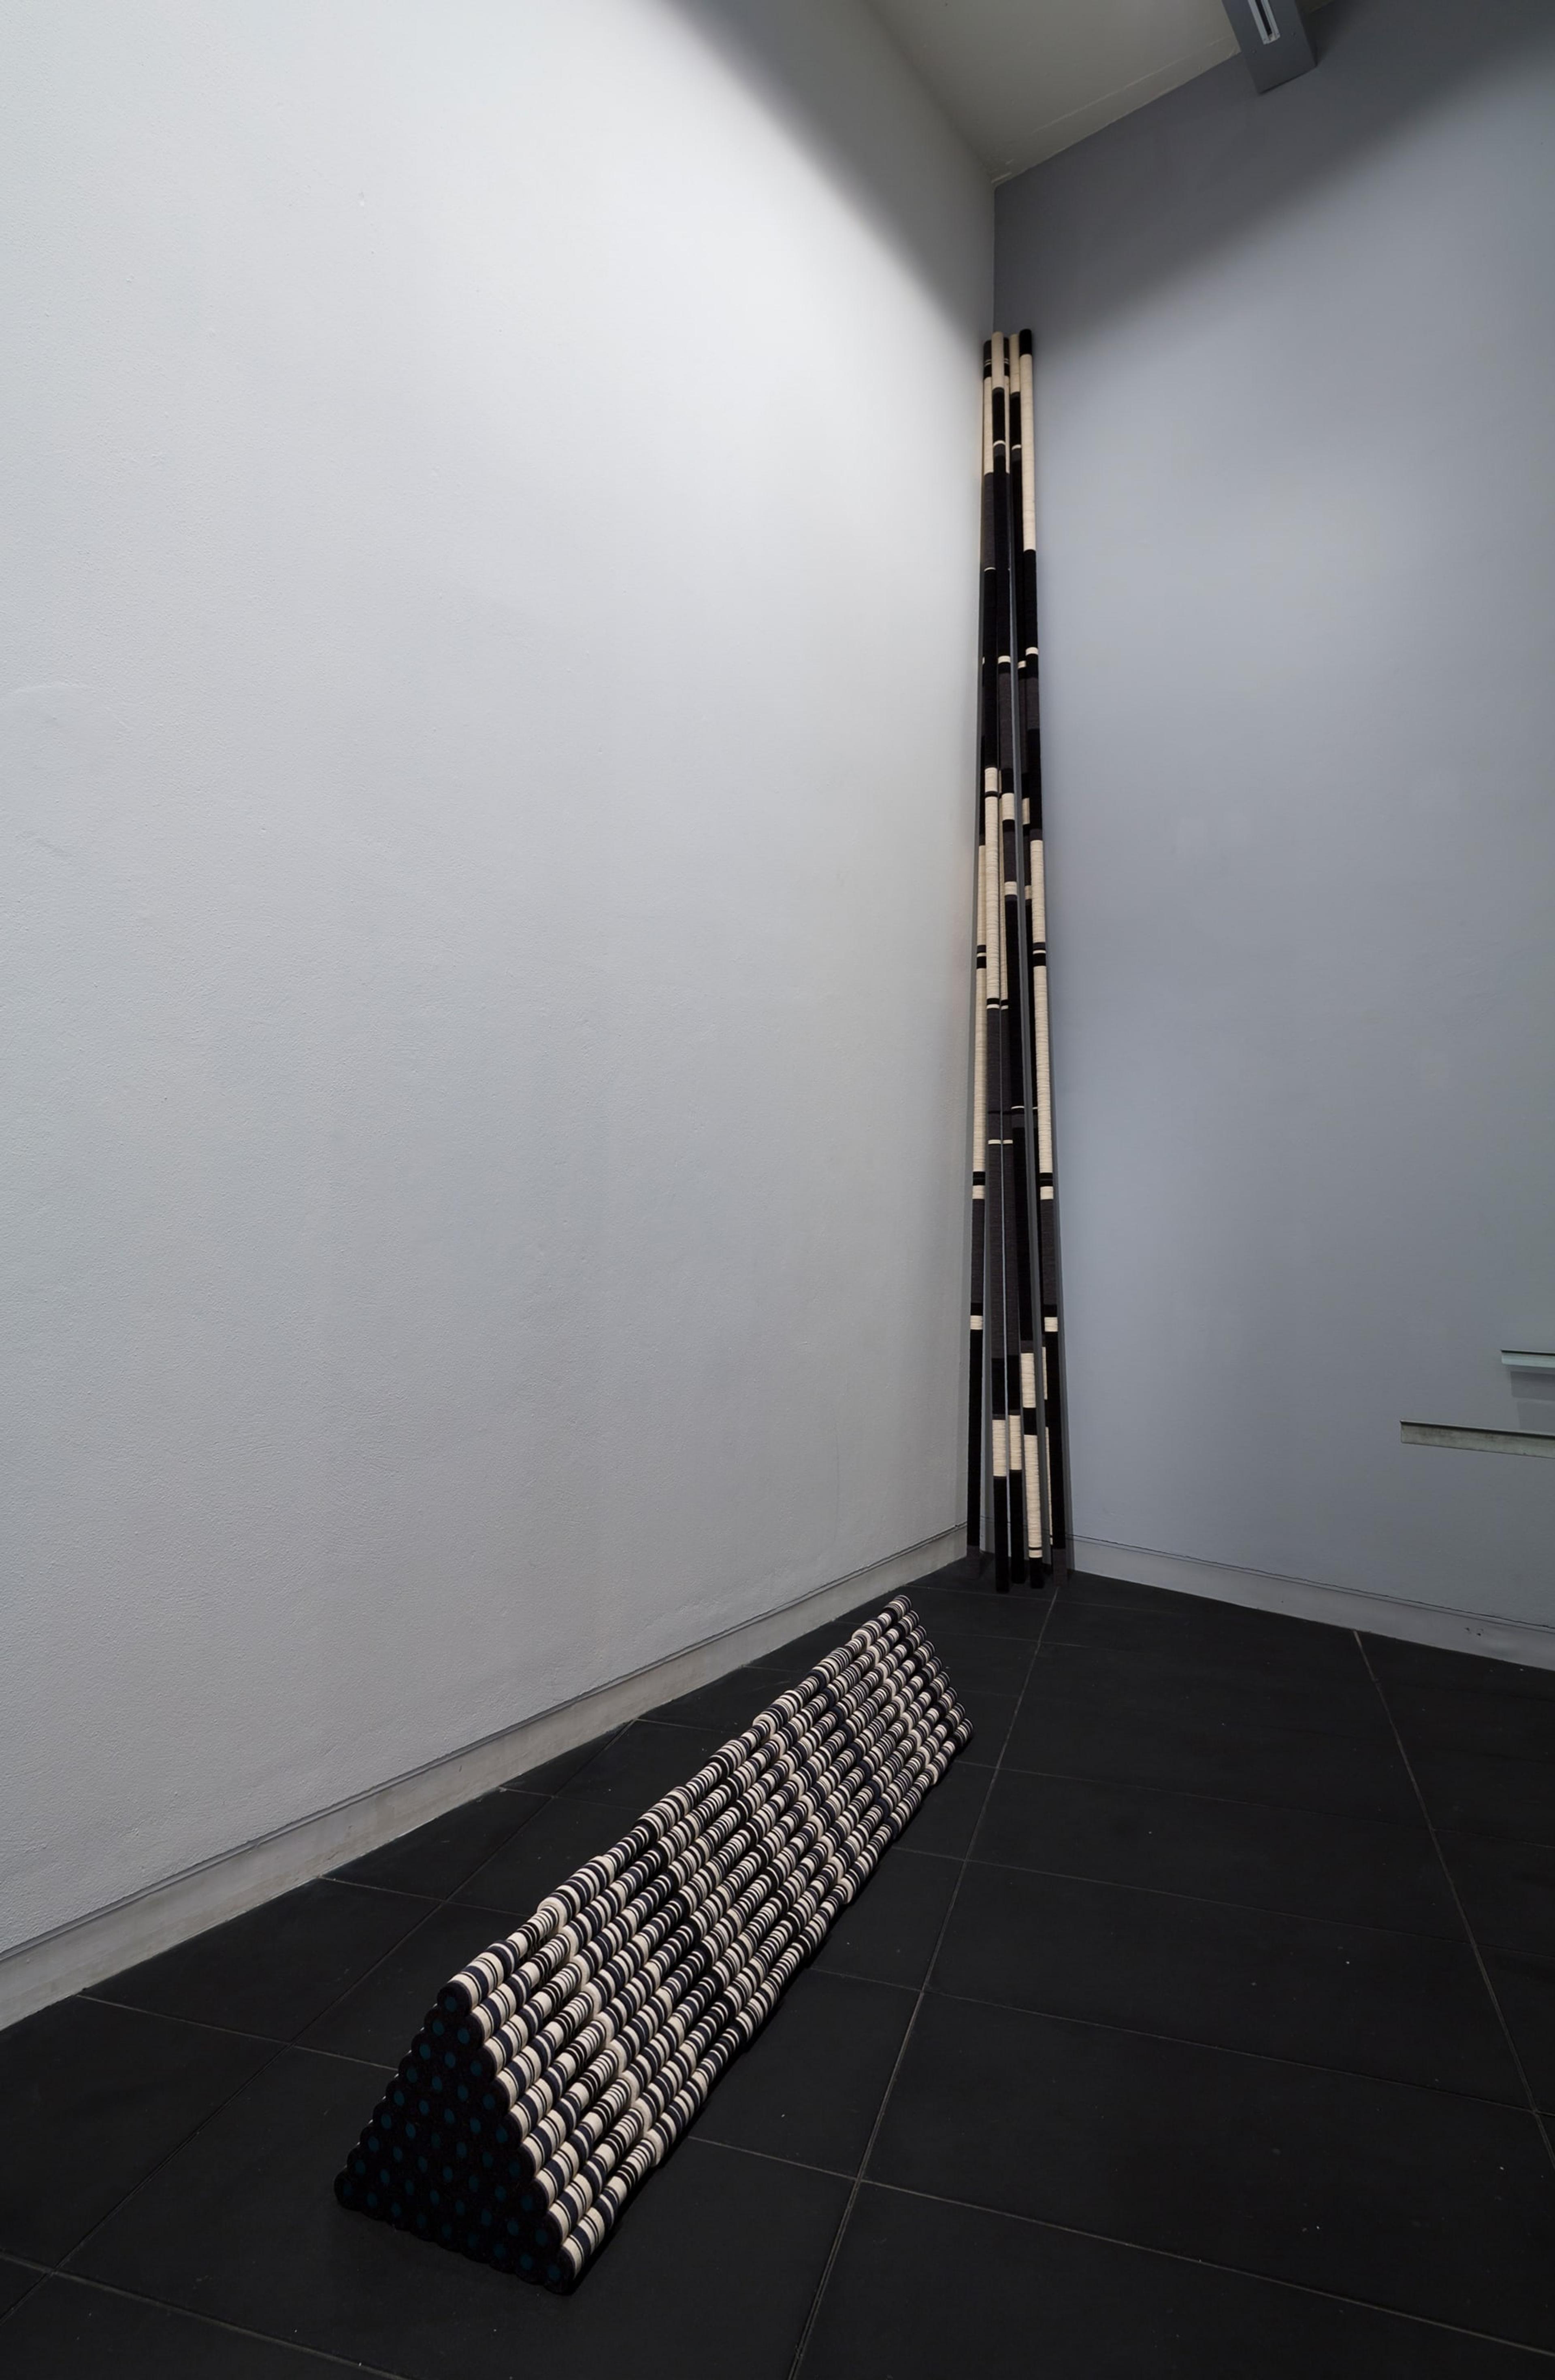 Installation view of Peter Robinson, Cuts and Junctures, 2013, cut wool felt, aluminum, perspex, installation dimensions variable, at the Adam Art Gallery. Courtesy the artist and Peter McLeavey Gallery, Wellington. Photo: Shaun Waugh.